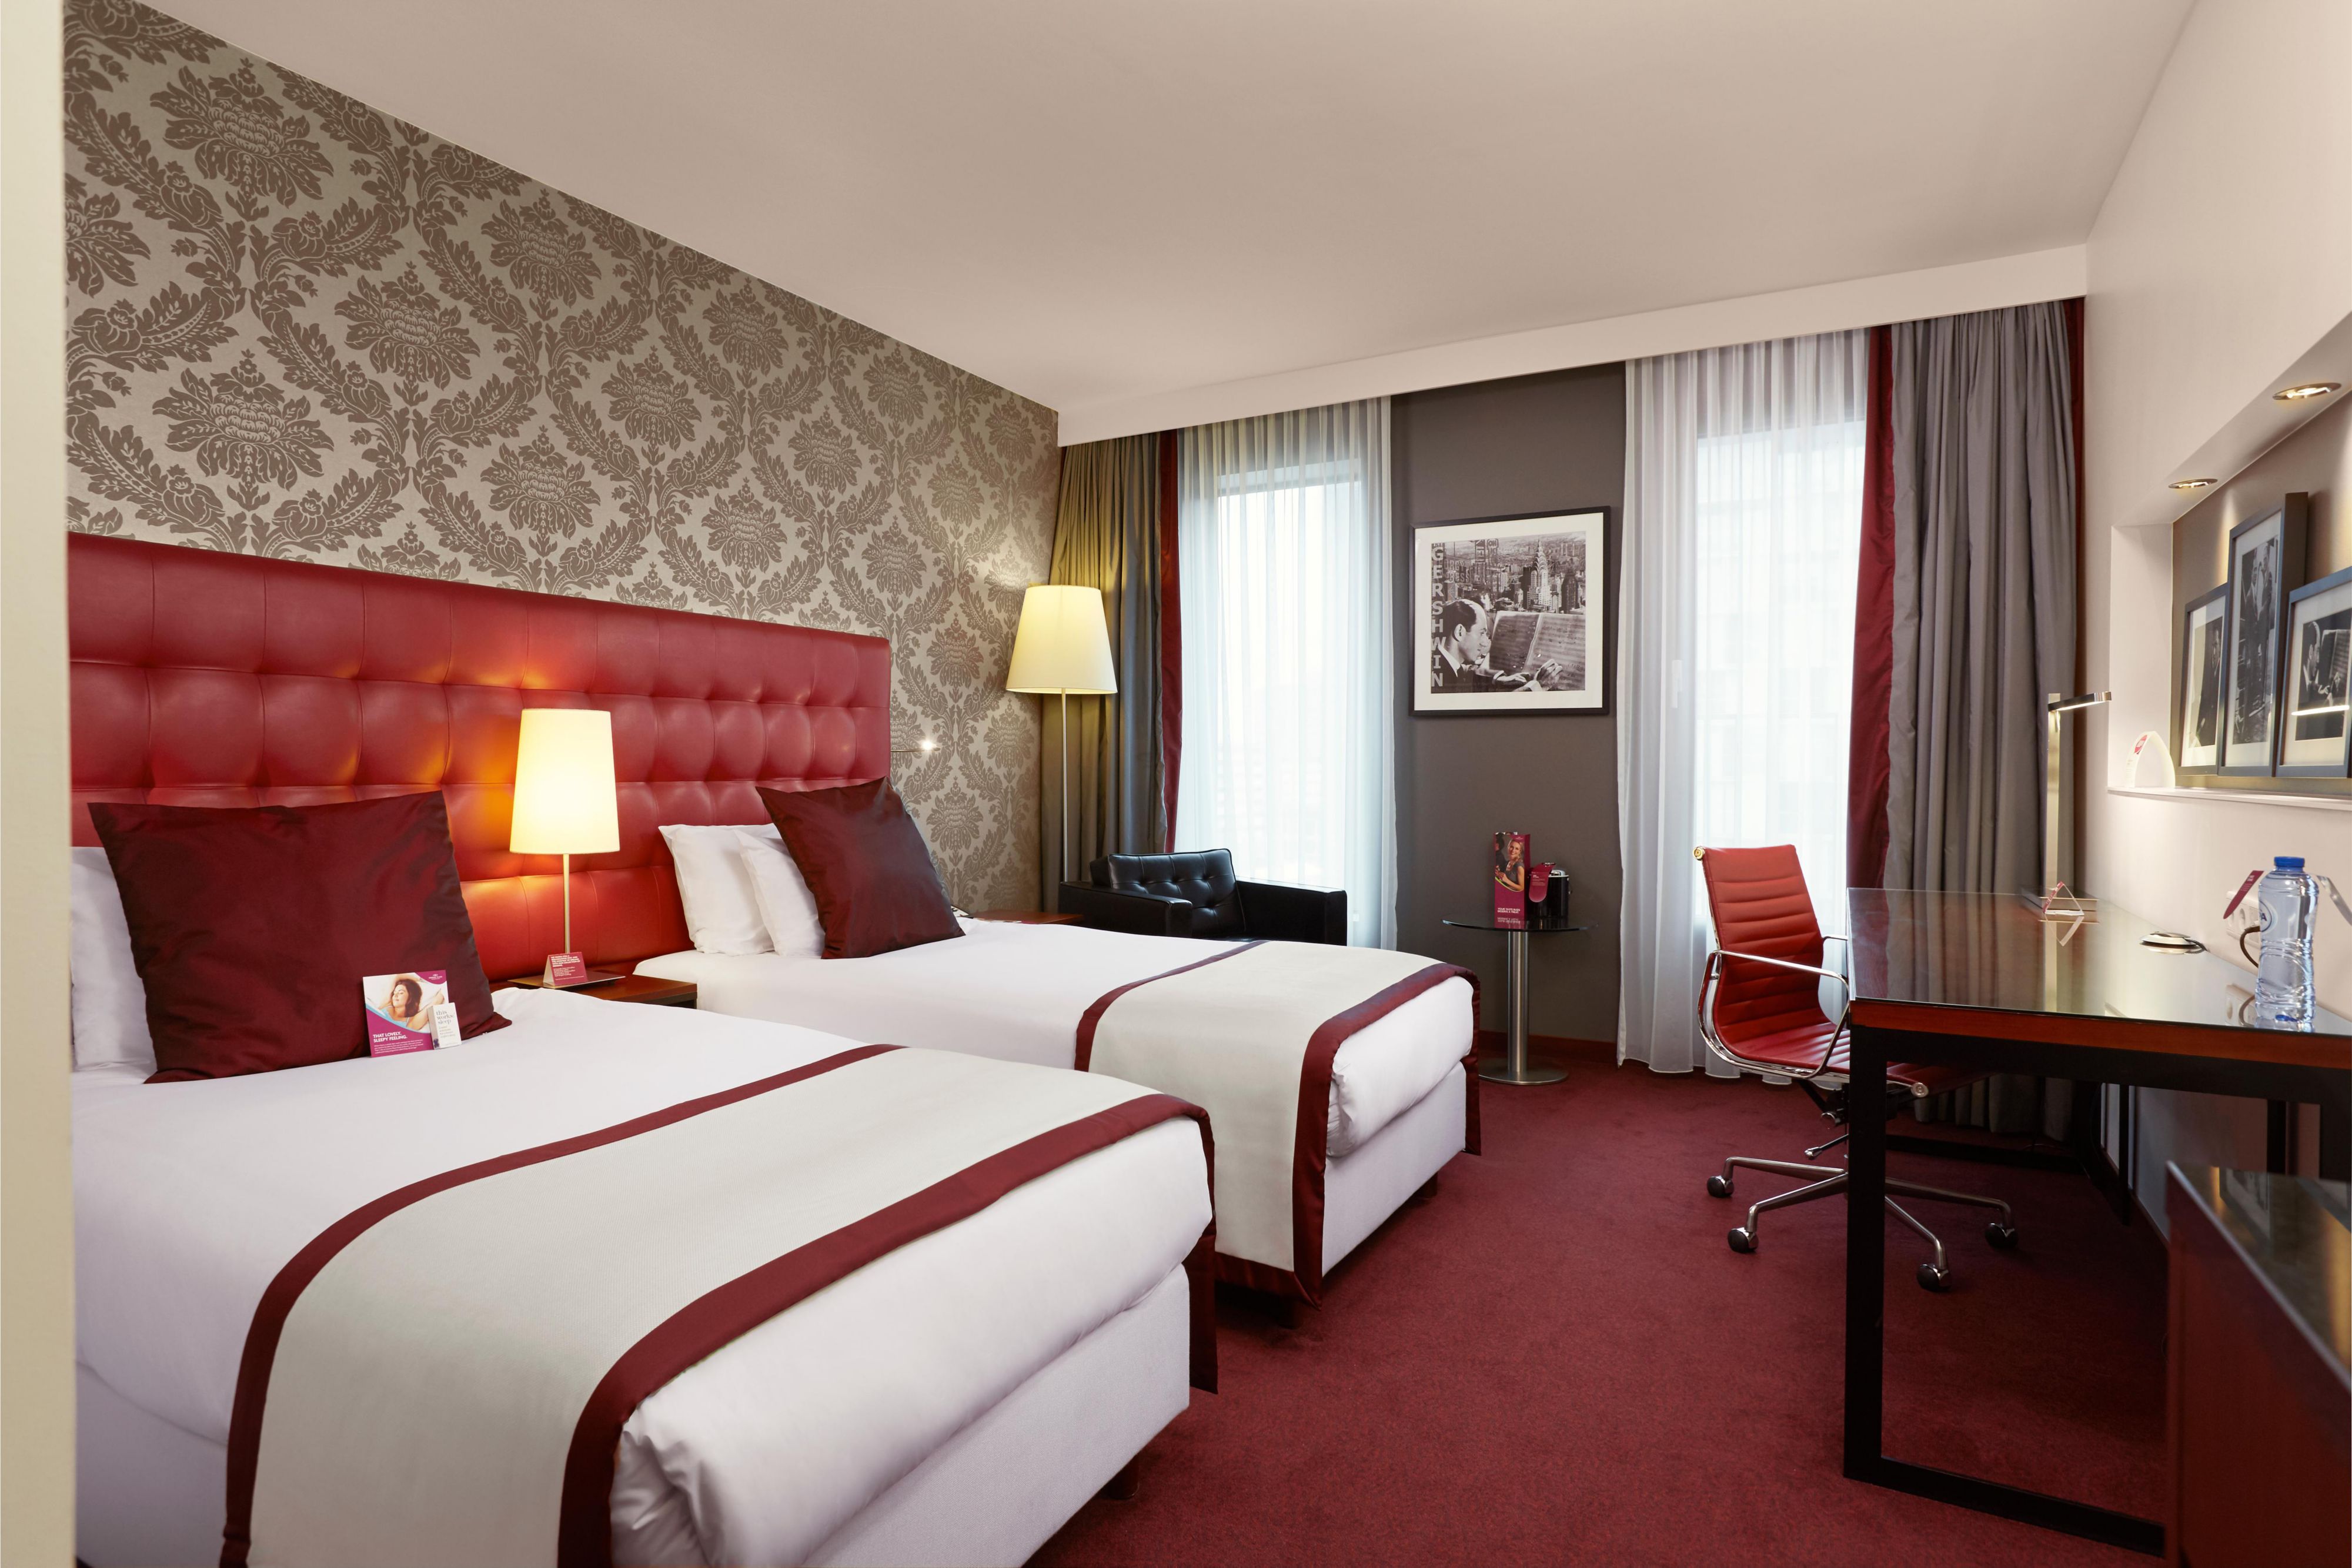 Twin Superior room at the Crowne Plaza hotel Amsterdam South